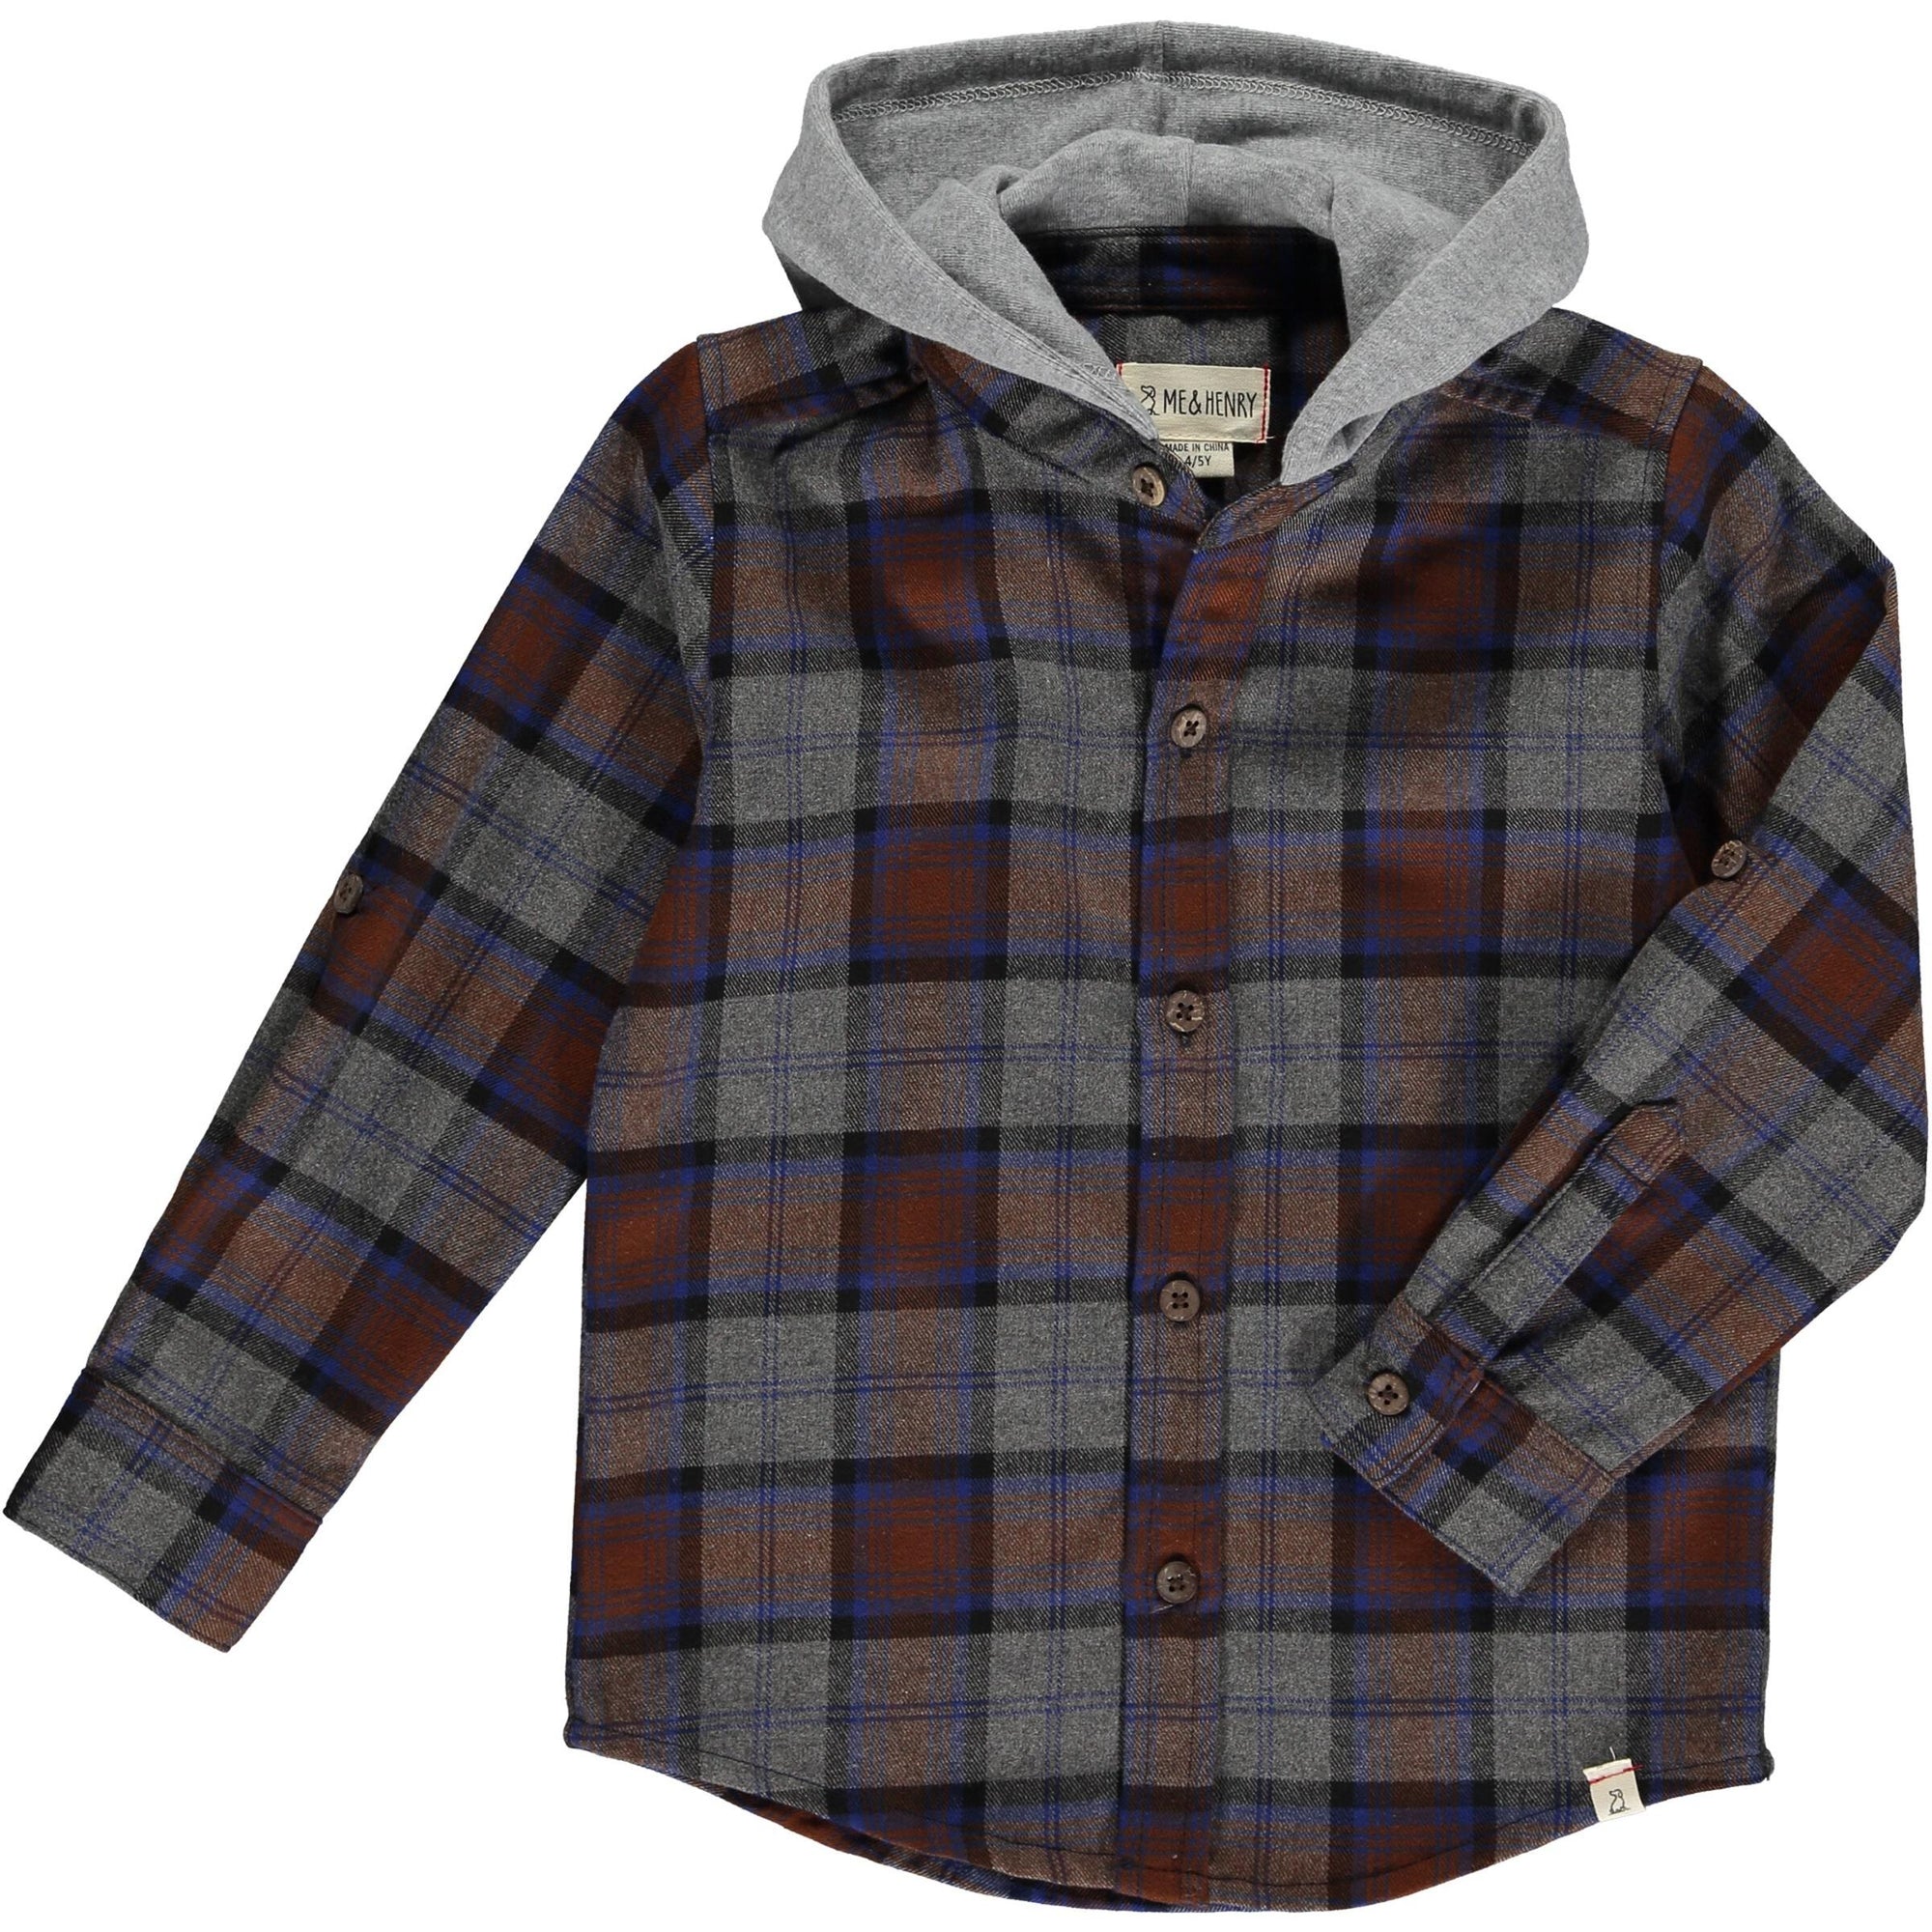 Me & Henry Erin Hooded Woven Shirt / Brown, Grey & Blue Plaid